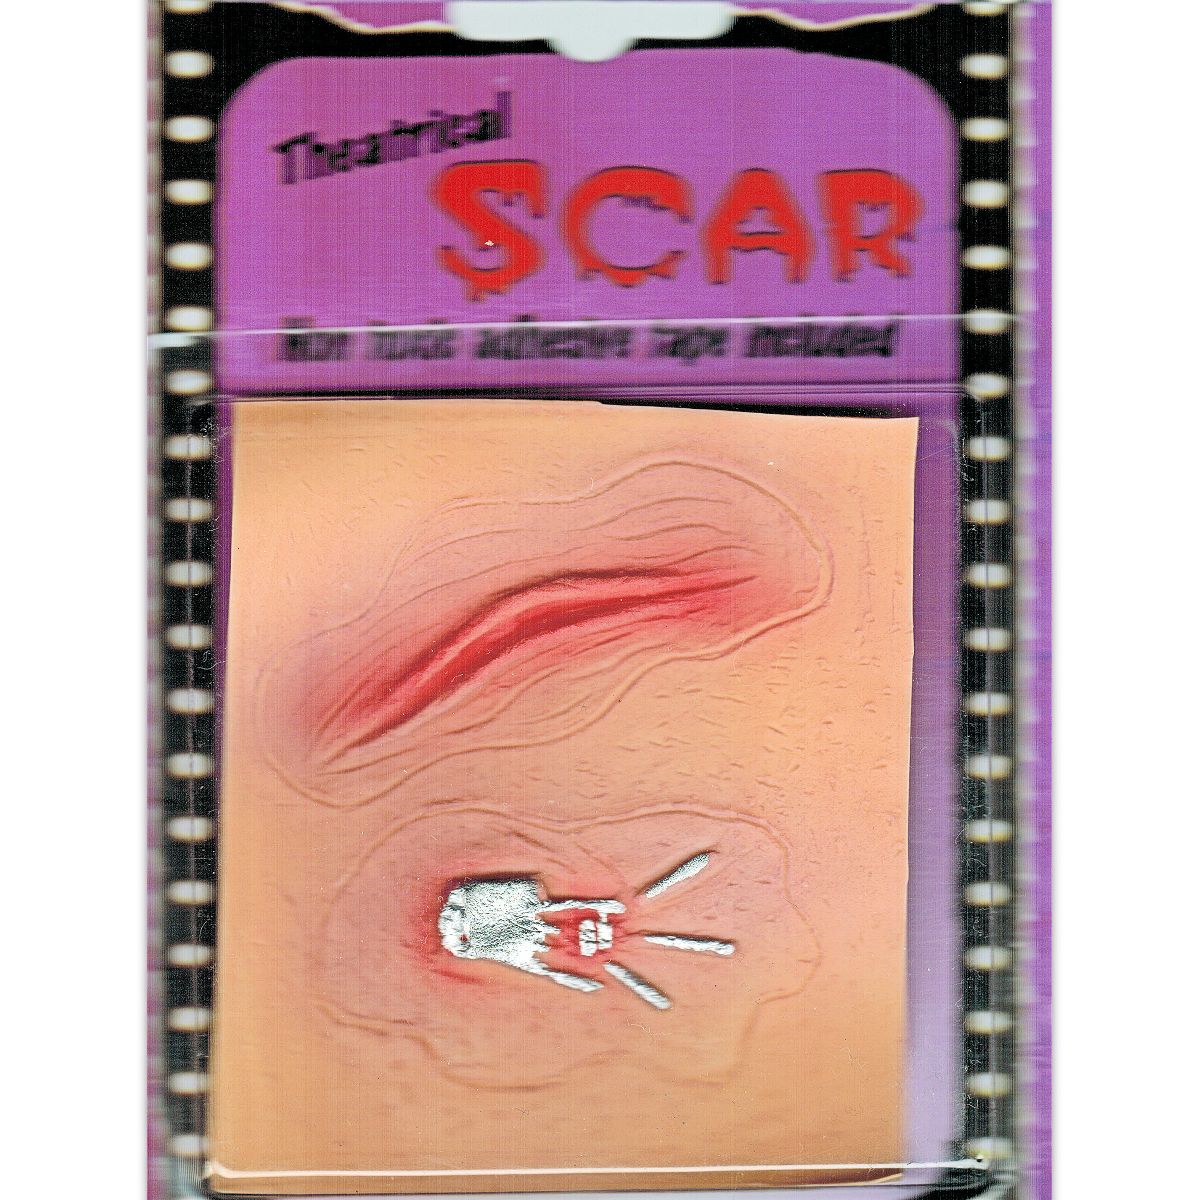 Stapled Wound Scars Latex Zombie Horror Makeup Special FX Costume accessory